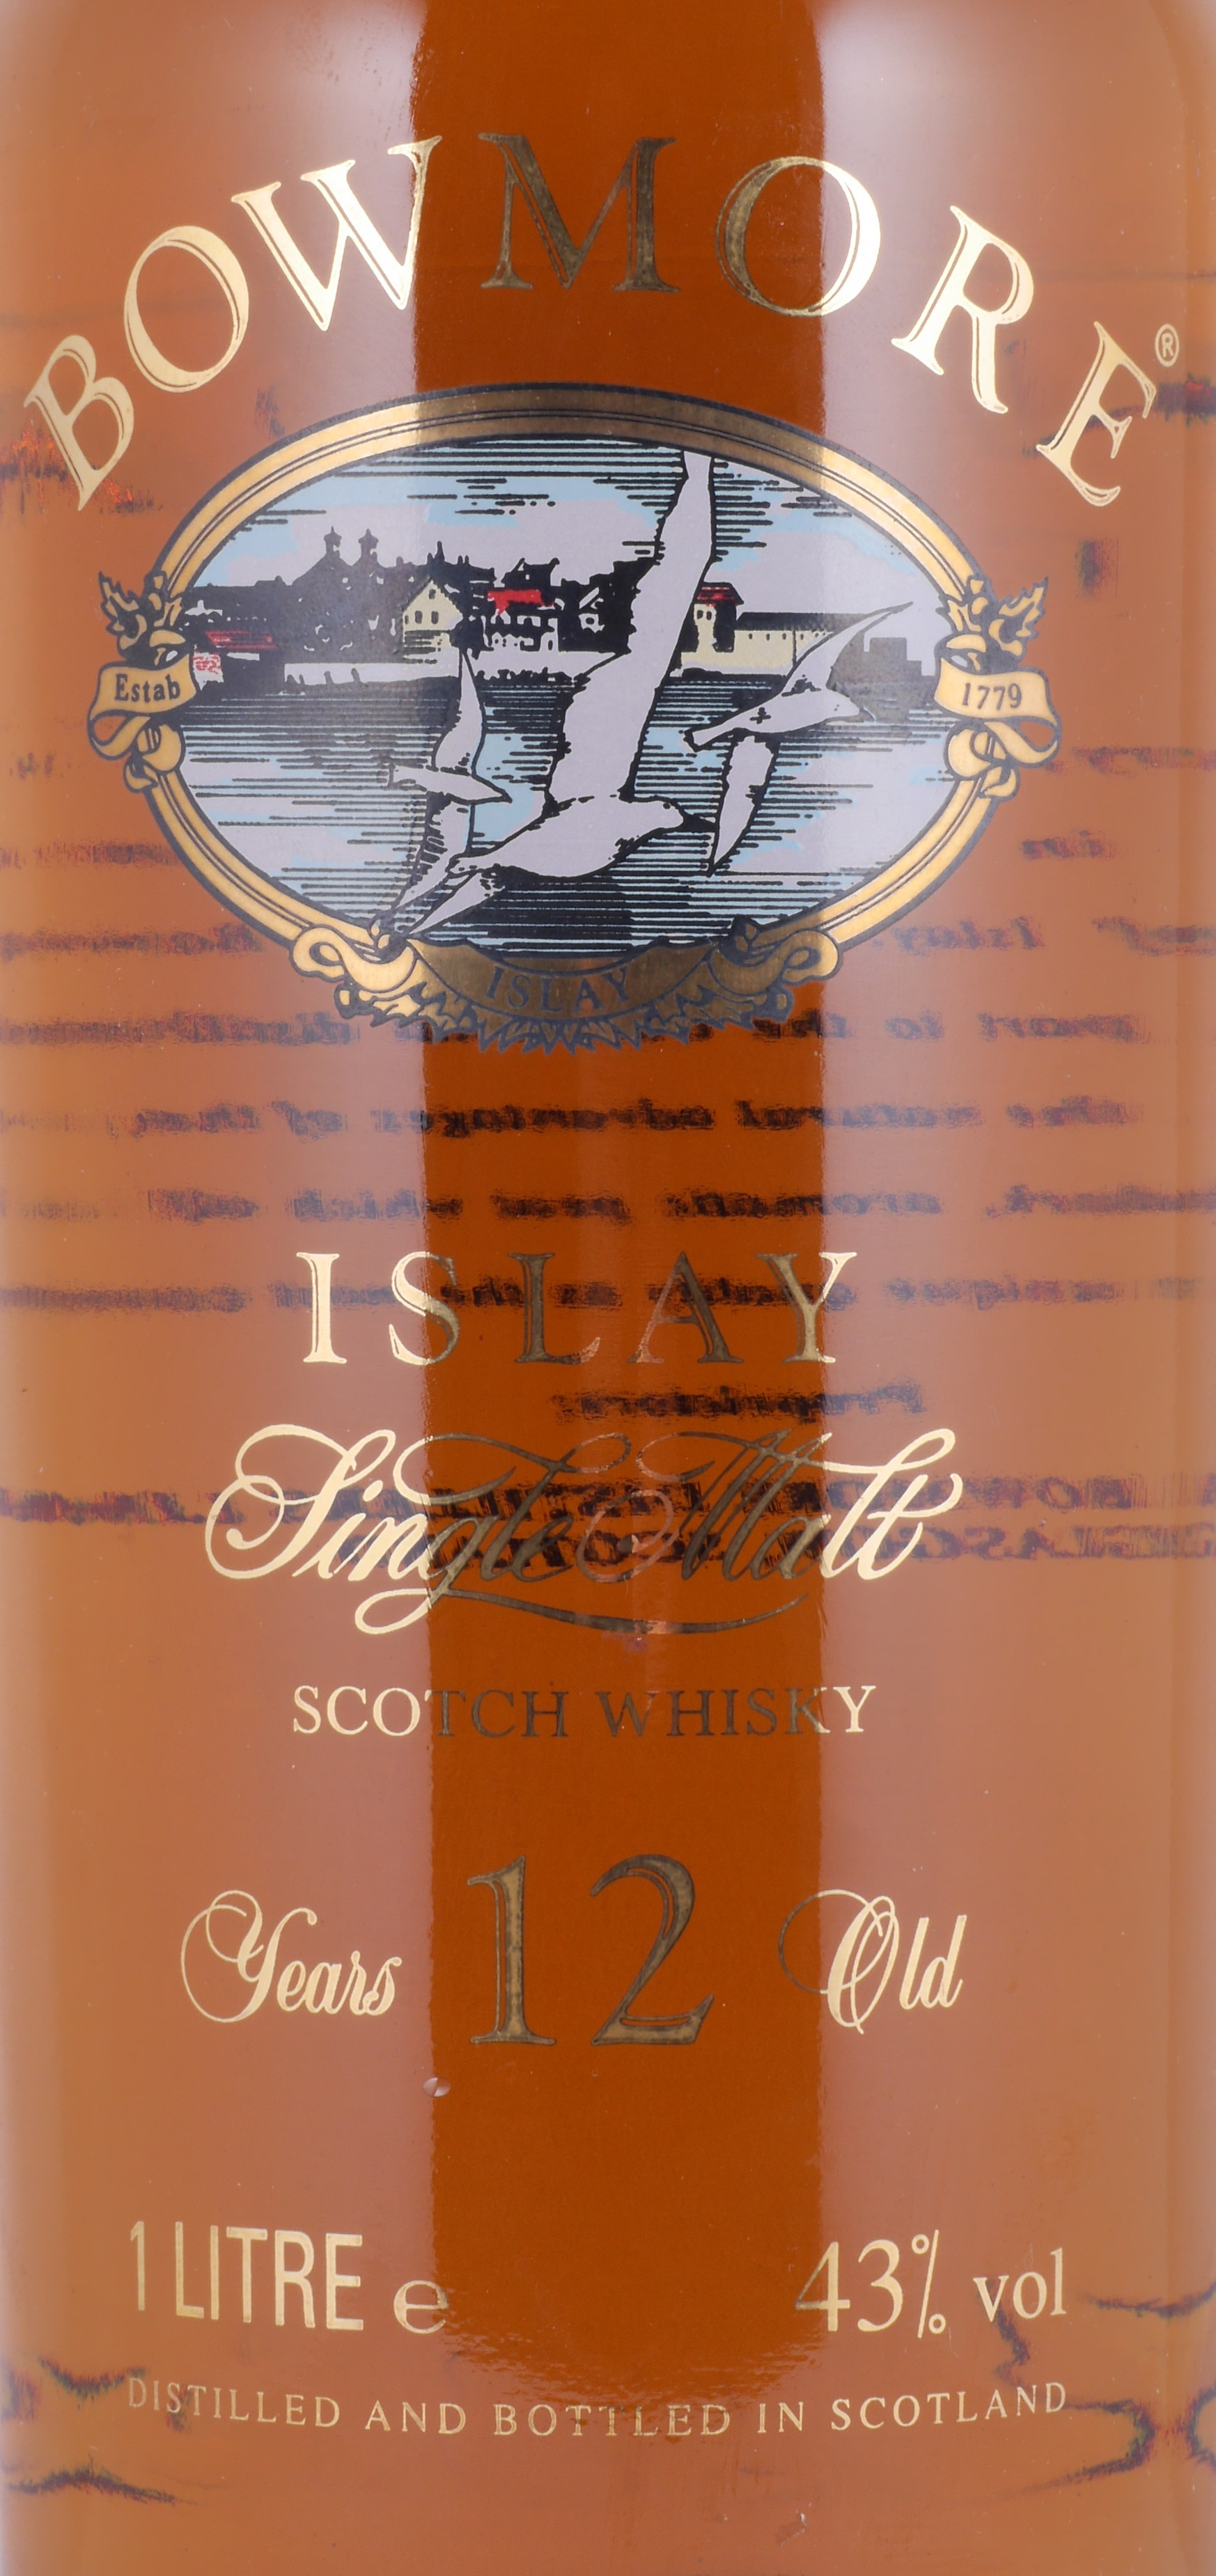 Buy Bowmore 12 Years-old Islay Single Malt Scotch Whisky Glass Printed  Label with 3 Icons 43.0% ABV at AmCom secure online | Whisky